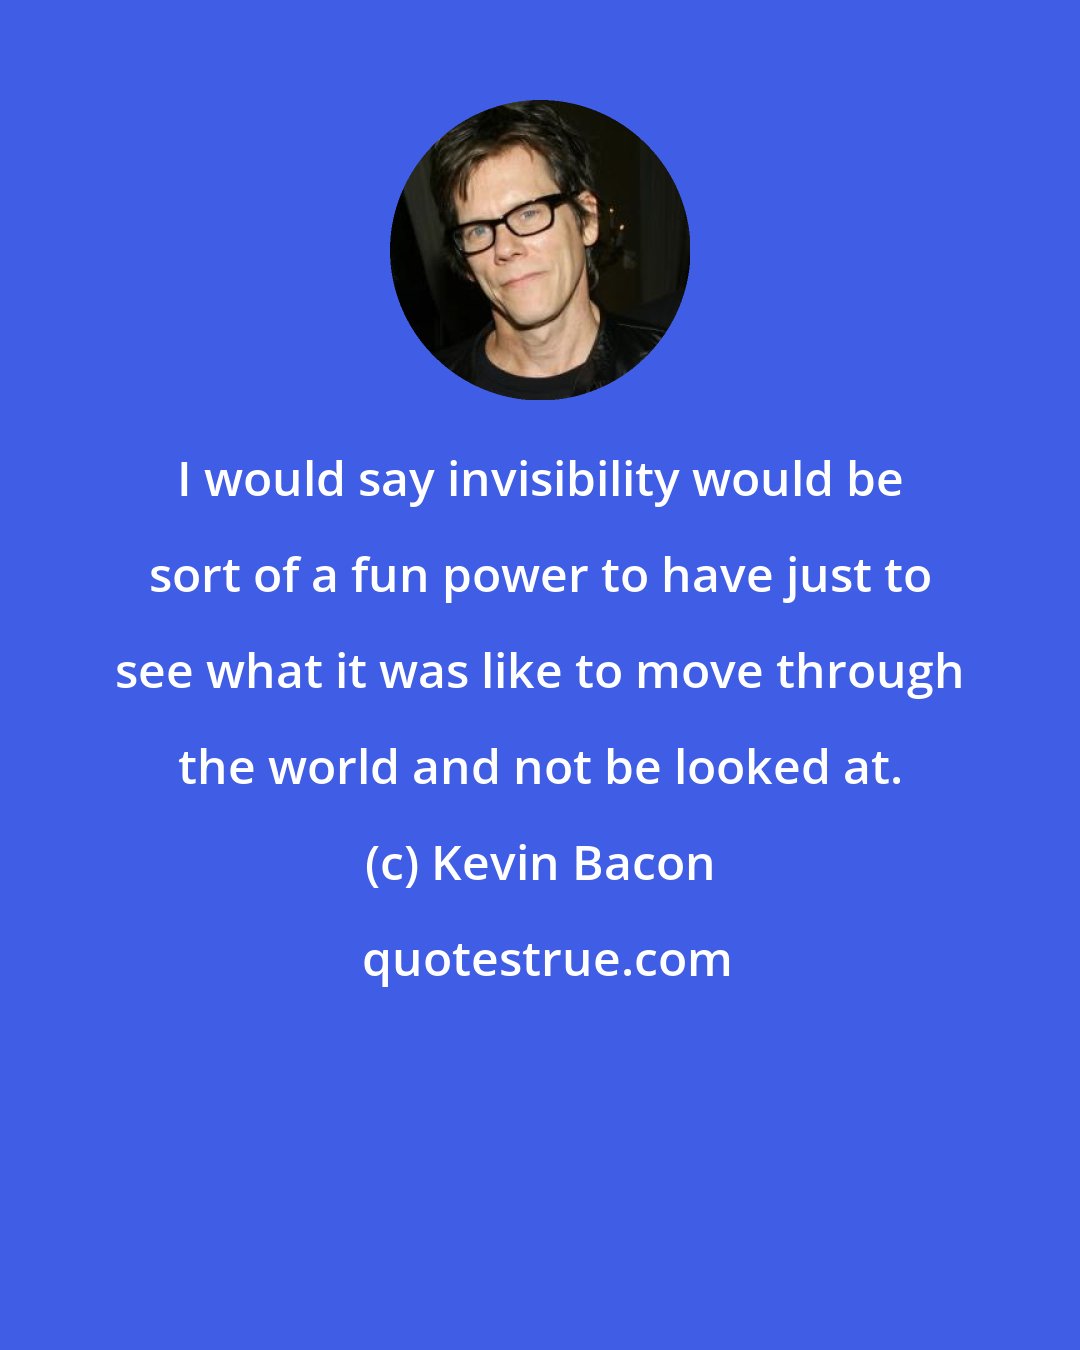 Kevin Bacon: I would say invisibility would be sort of a fun power to have just to see what it was like to move through the world and not be looked at.